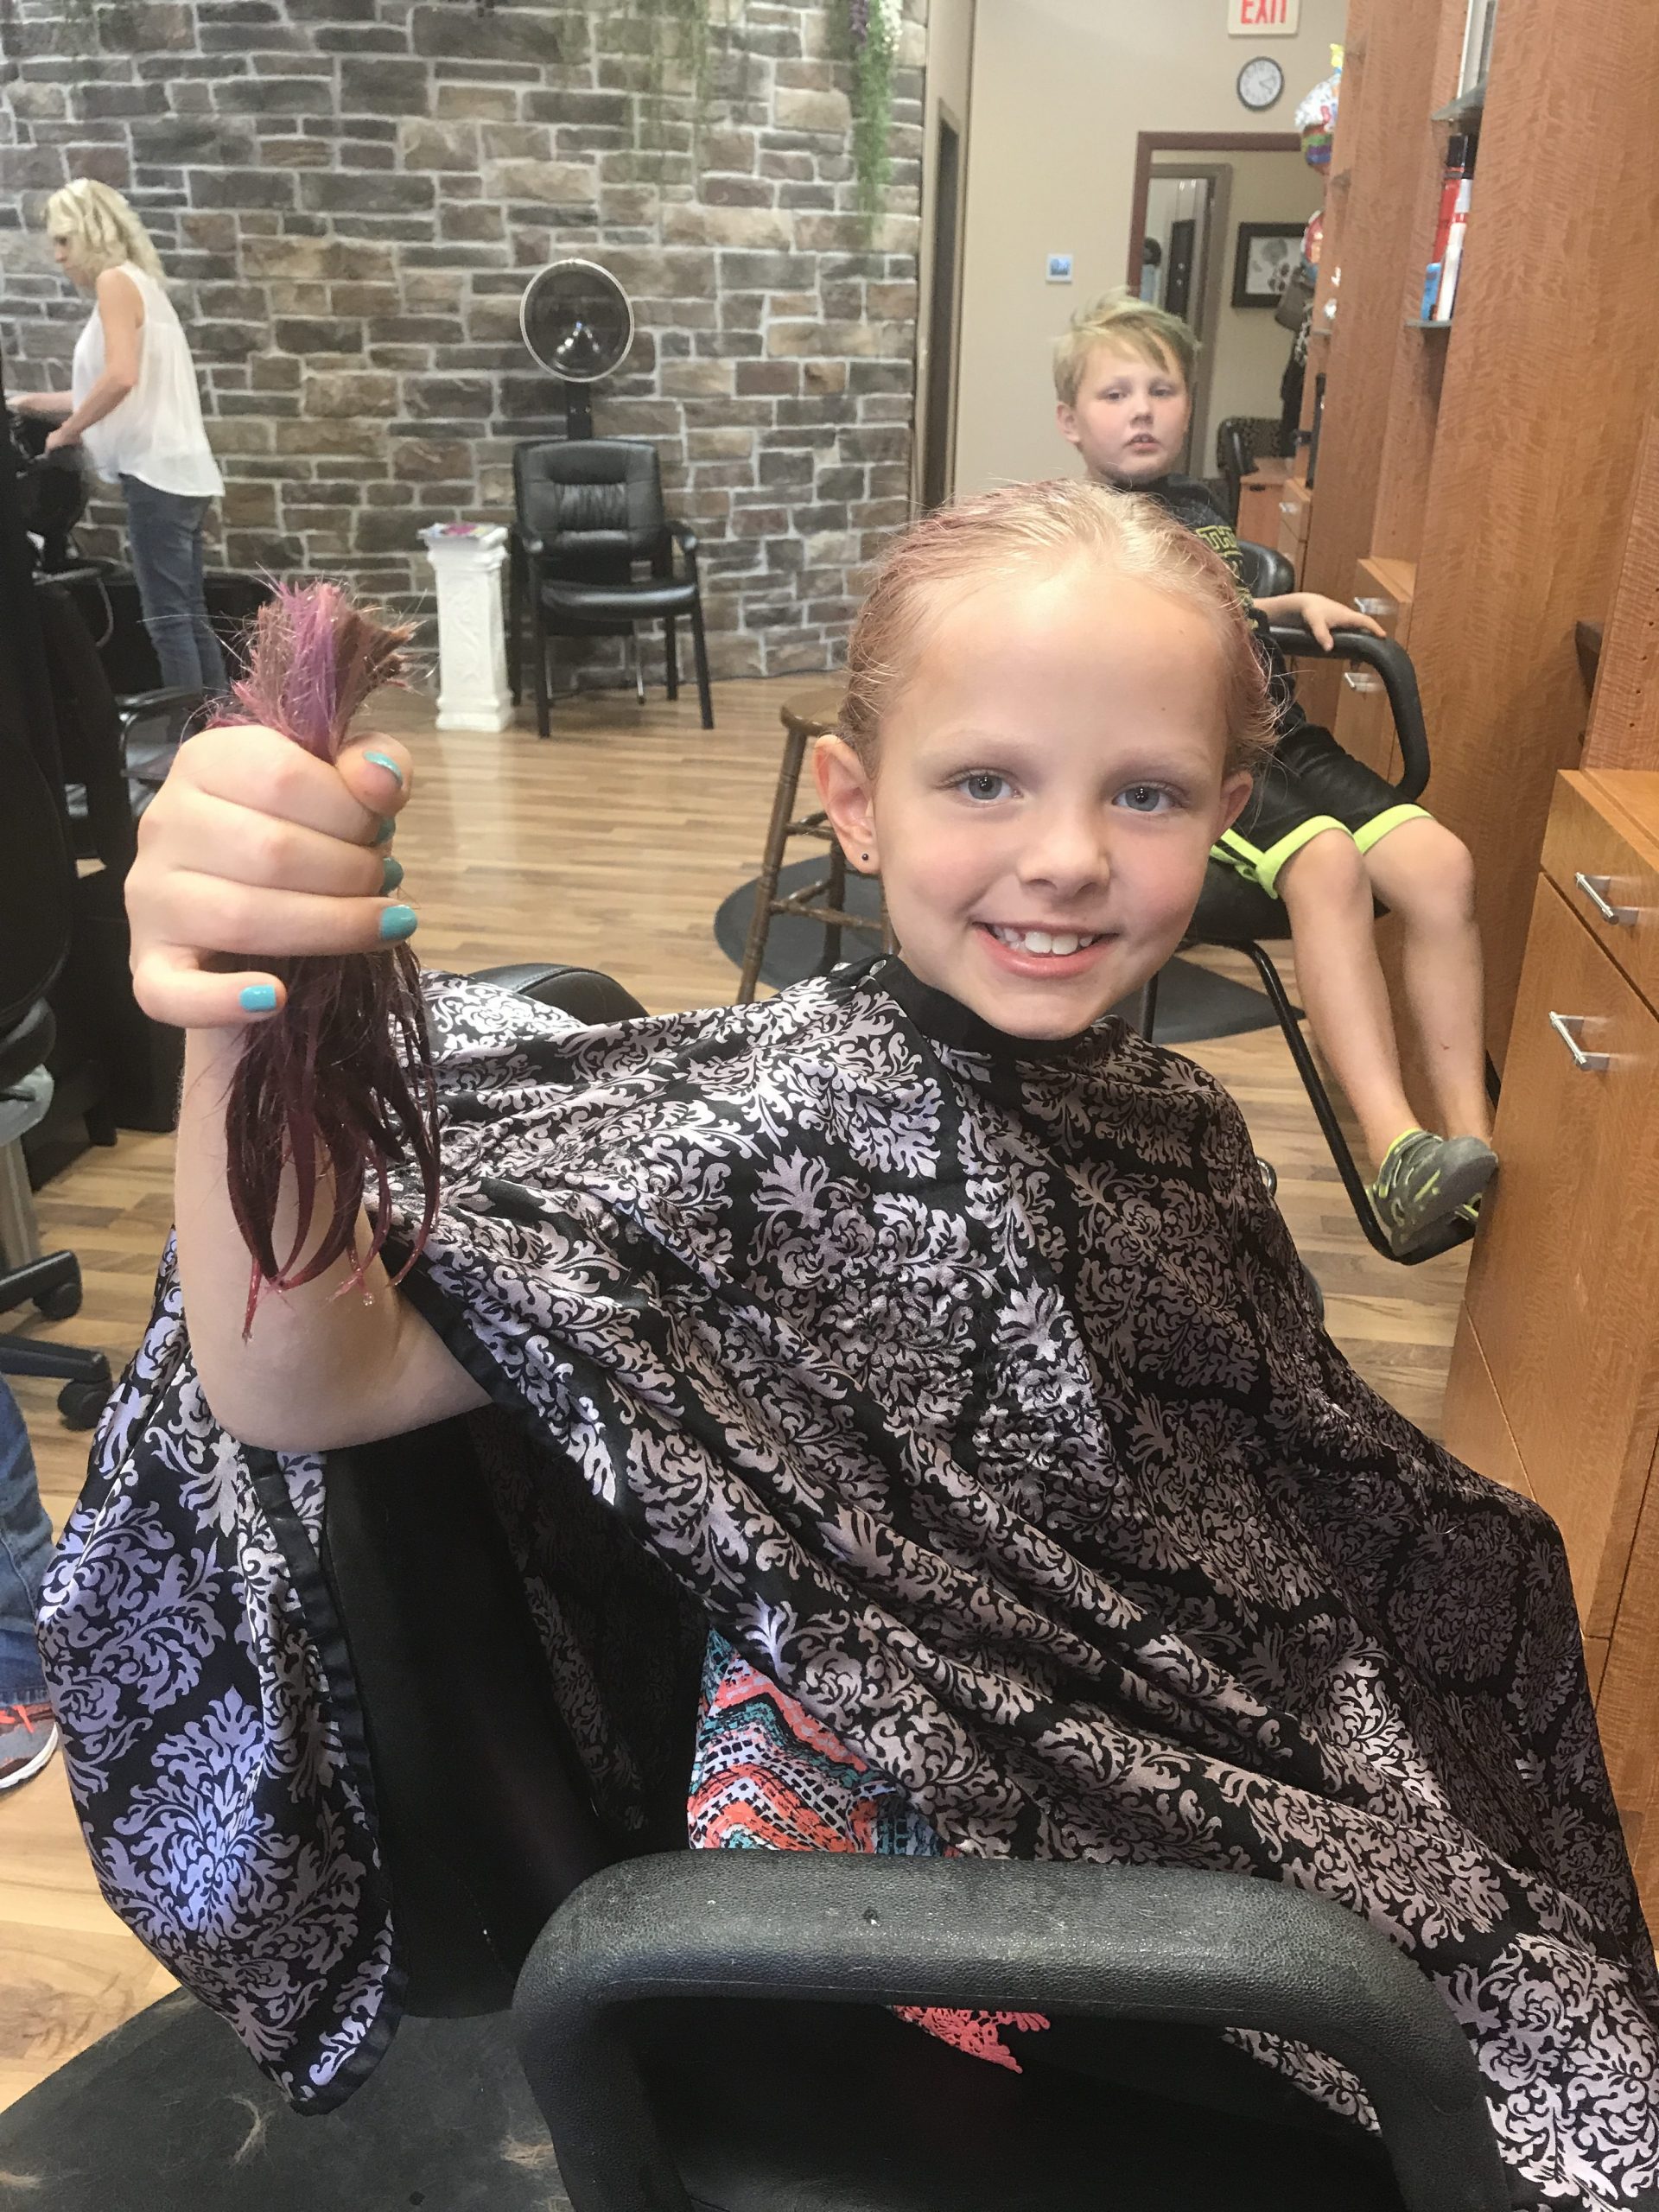 kids in salon, girl holding cut off ponytail